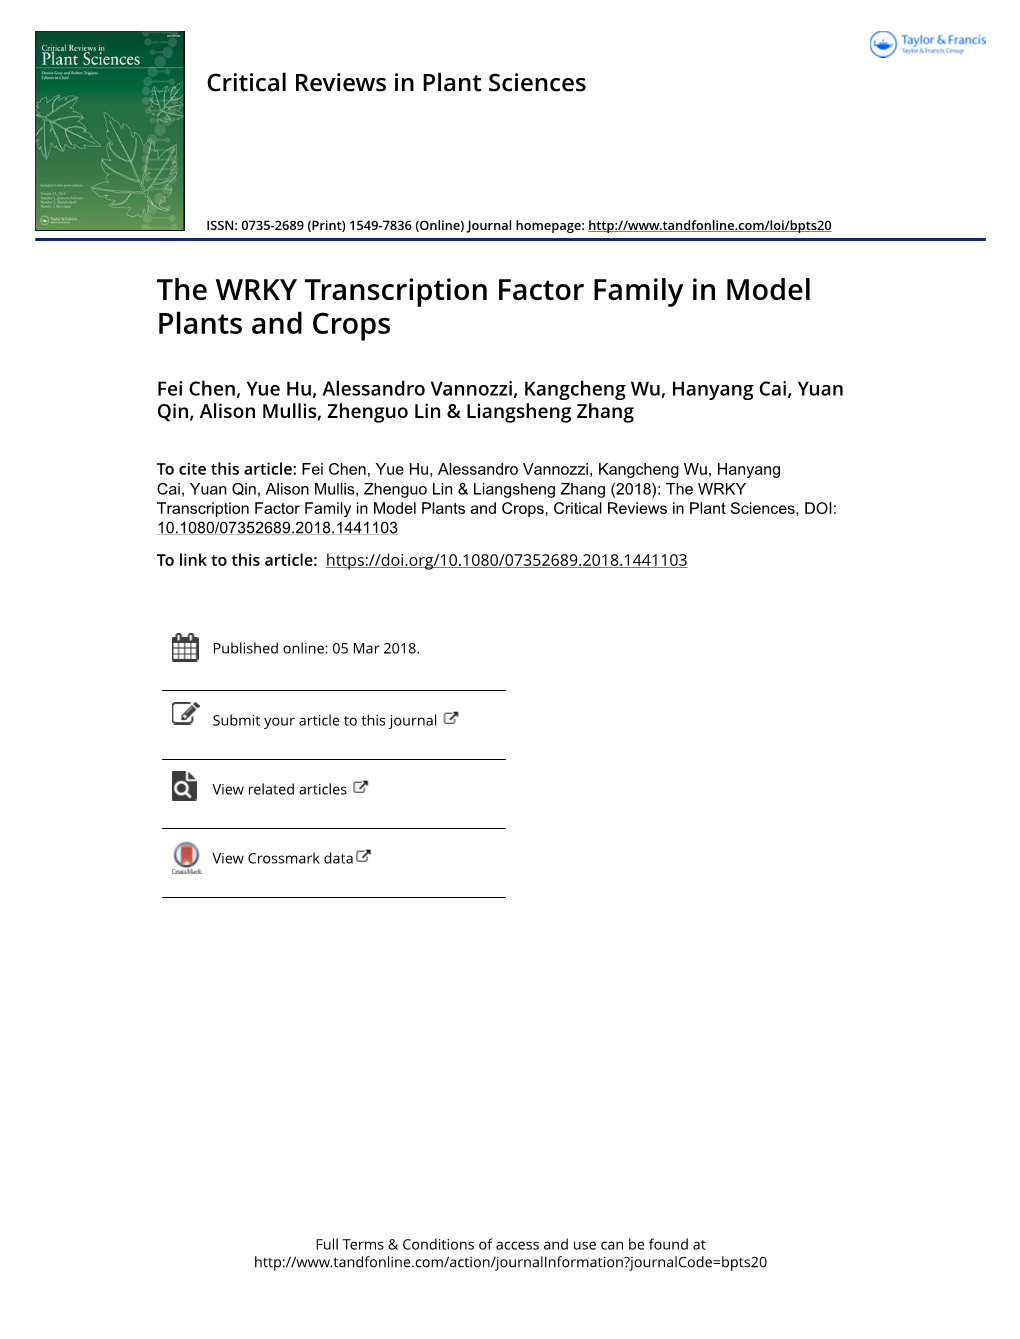 The WRKY Transcription Factor Family in Model Plants and Crops